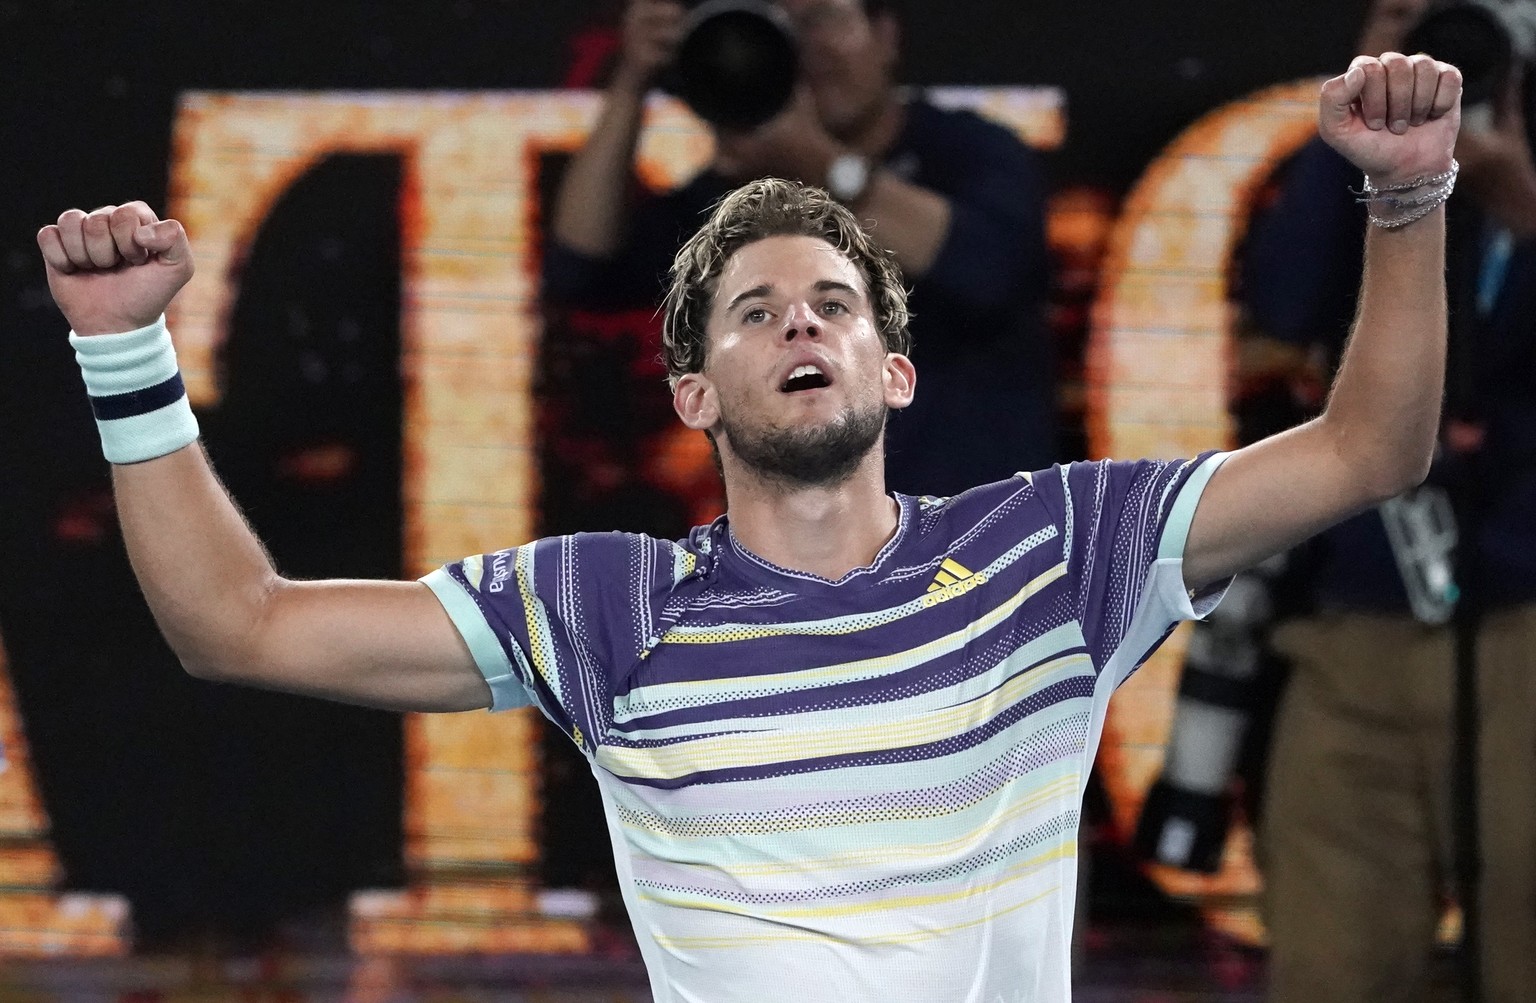 Austria&#039;s Dominic Thiem celebrates after defeating Germany&#039;s Alexander Zverev in their semifinal match at the Australian Open tennis championship in Melbourne, Australia, Friday, Jan. 31, 20 ...